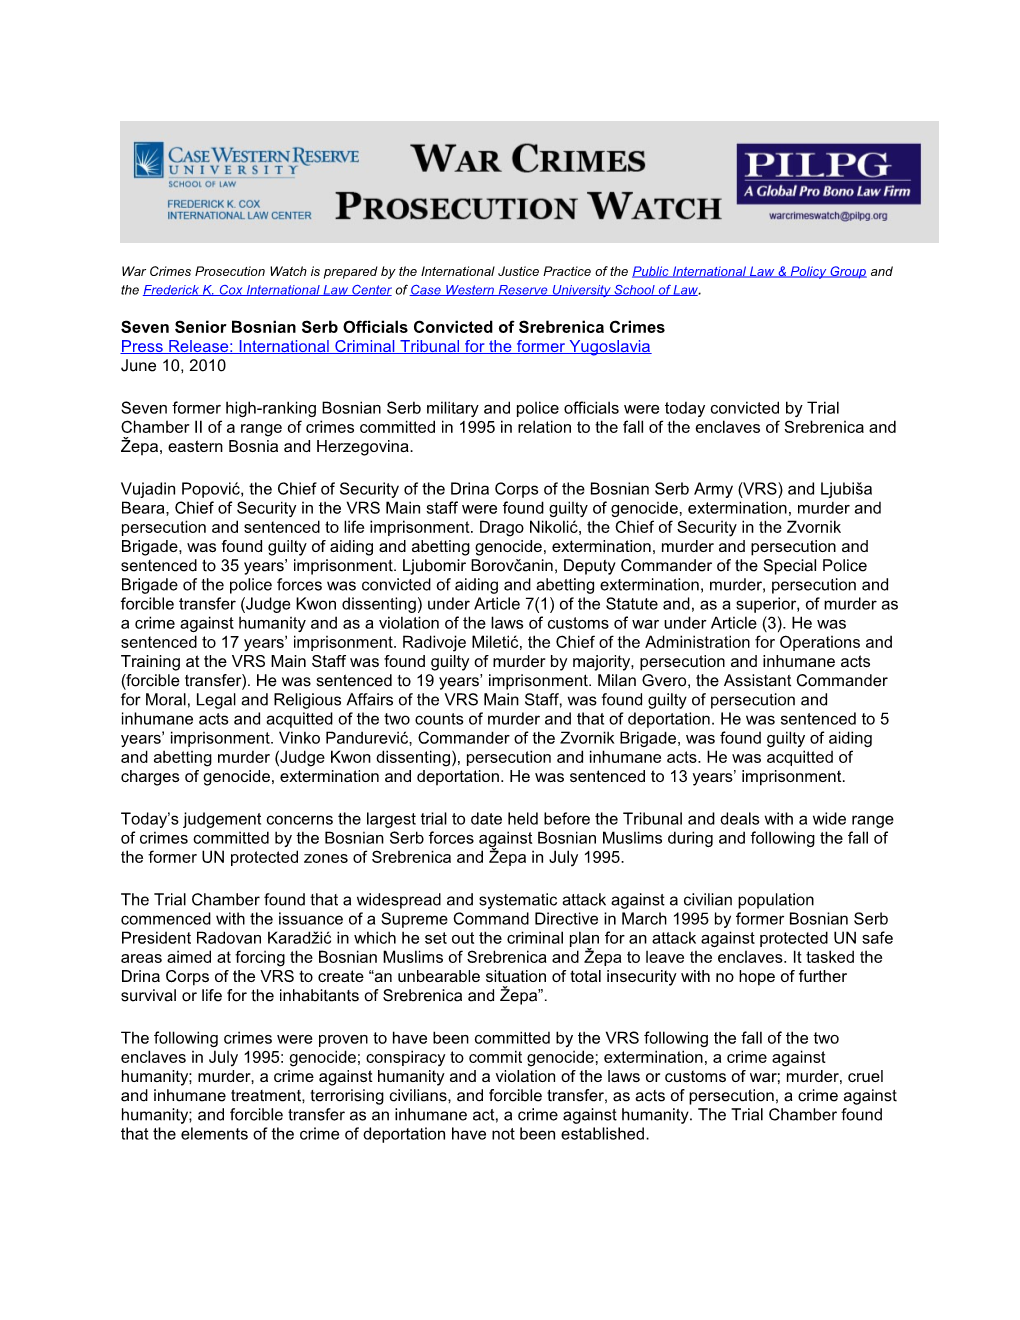 War Crimes Prosecution Watch Is Prepared by the International Justice Practice of The